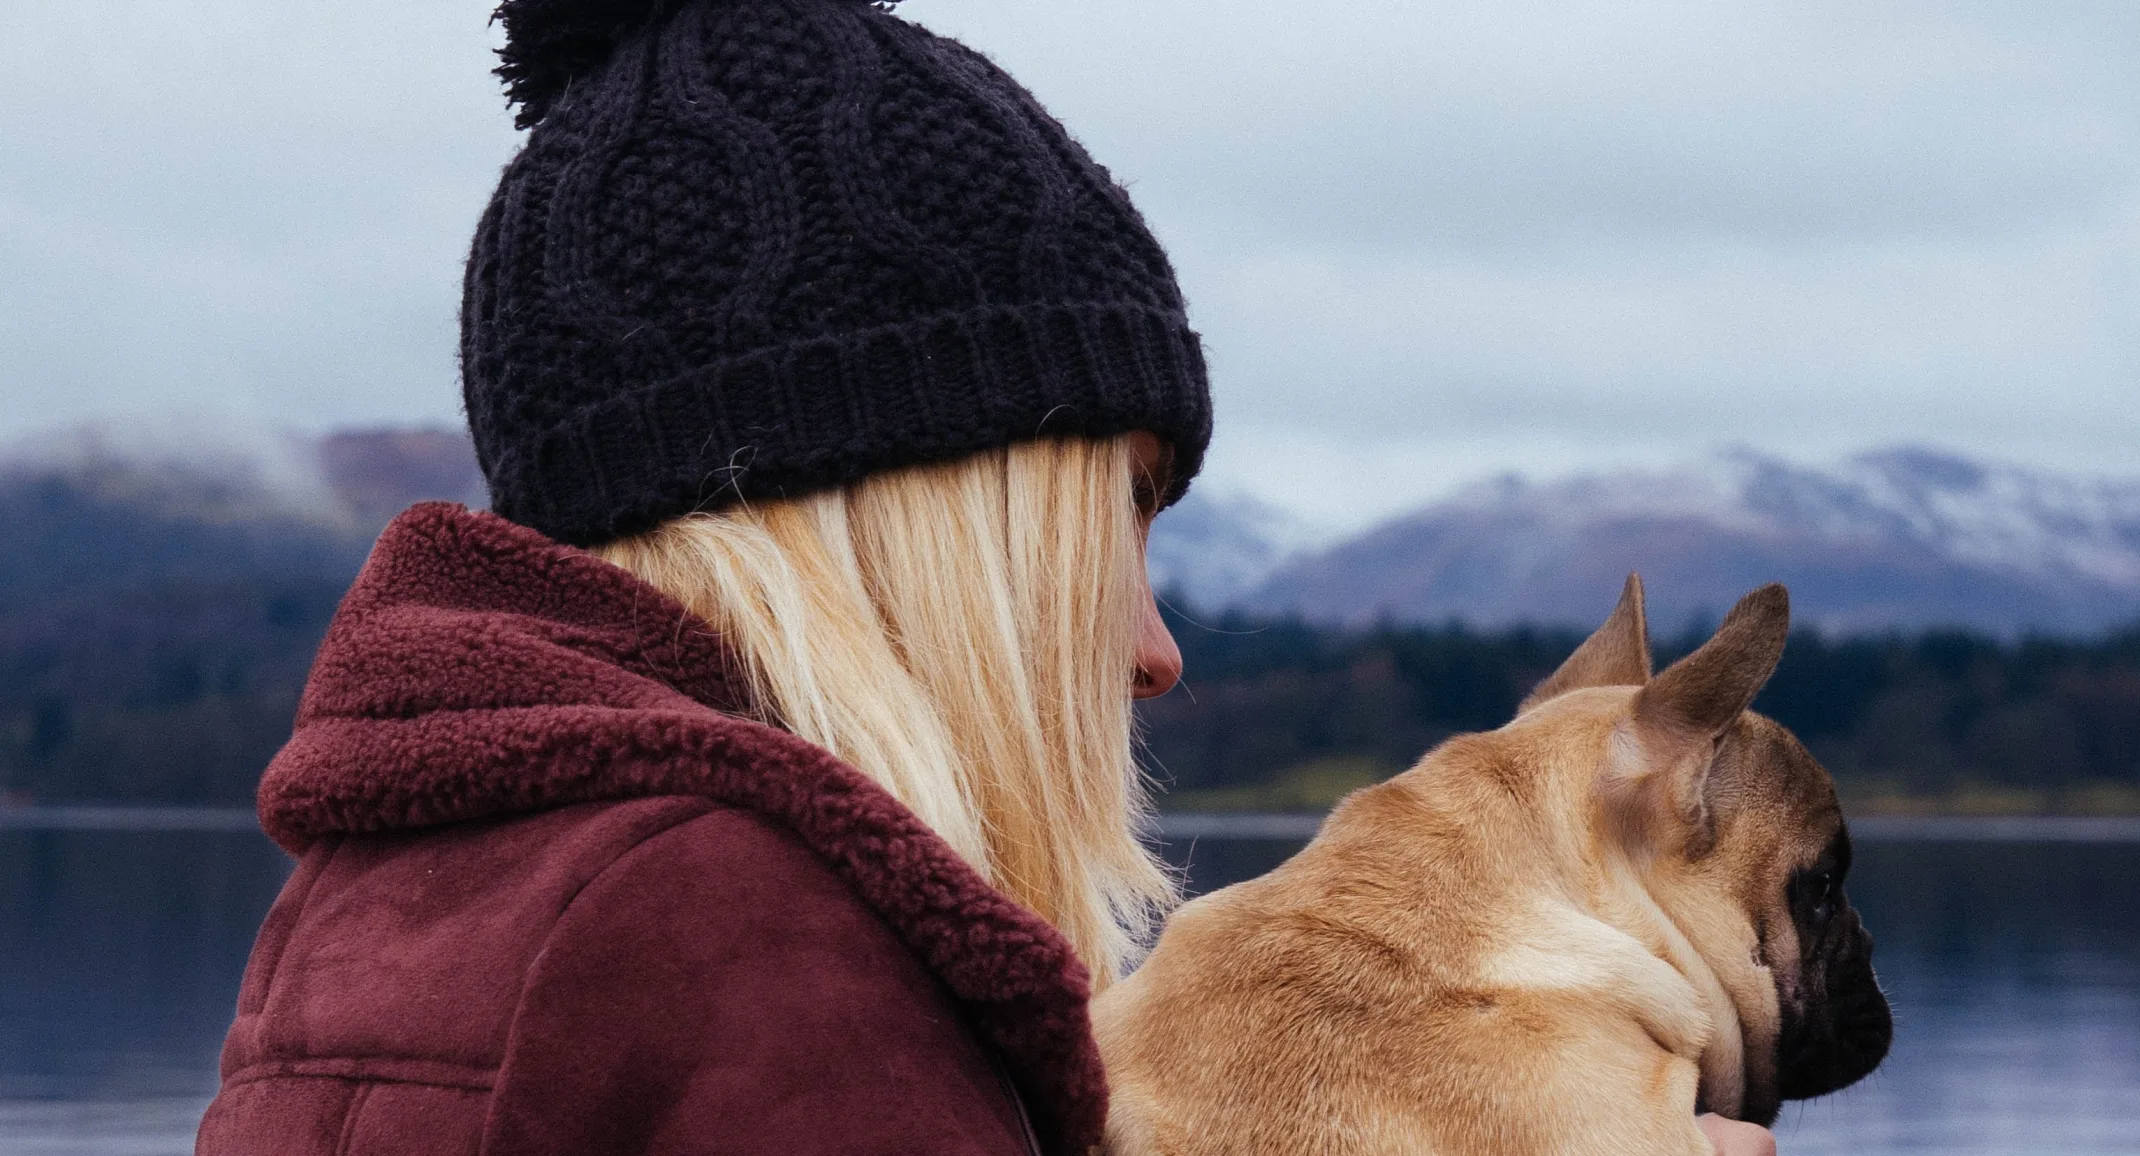 Blonde woman with a black beanie wearing a red jacket is holding her pug dog on a boat dock in winter.